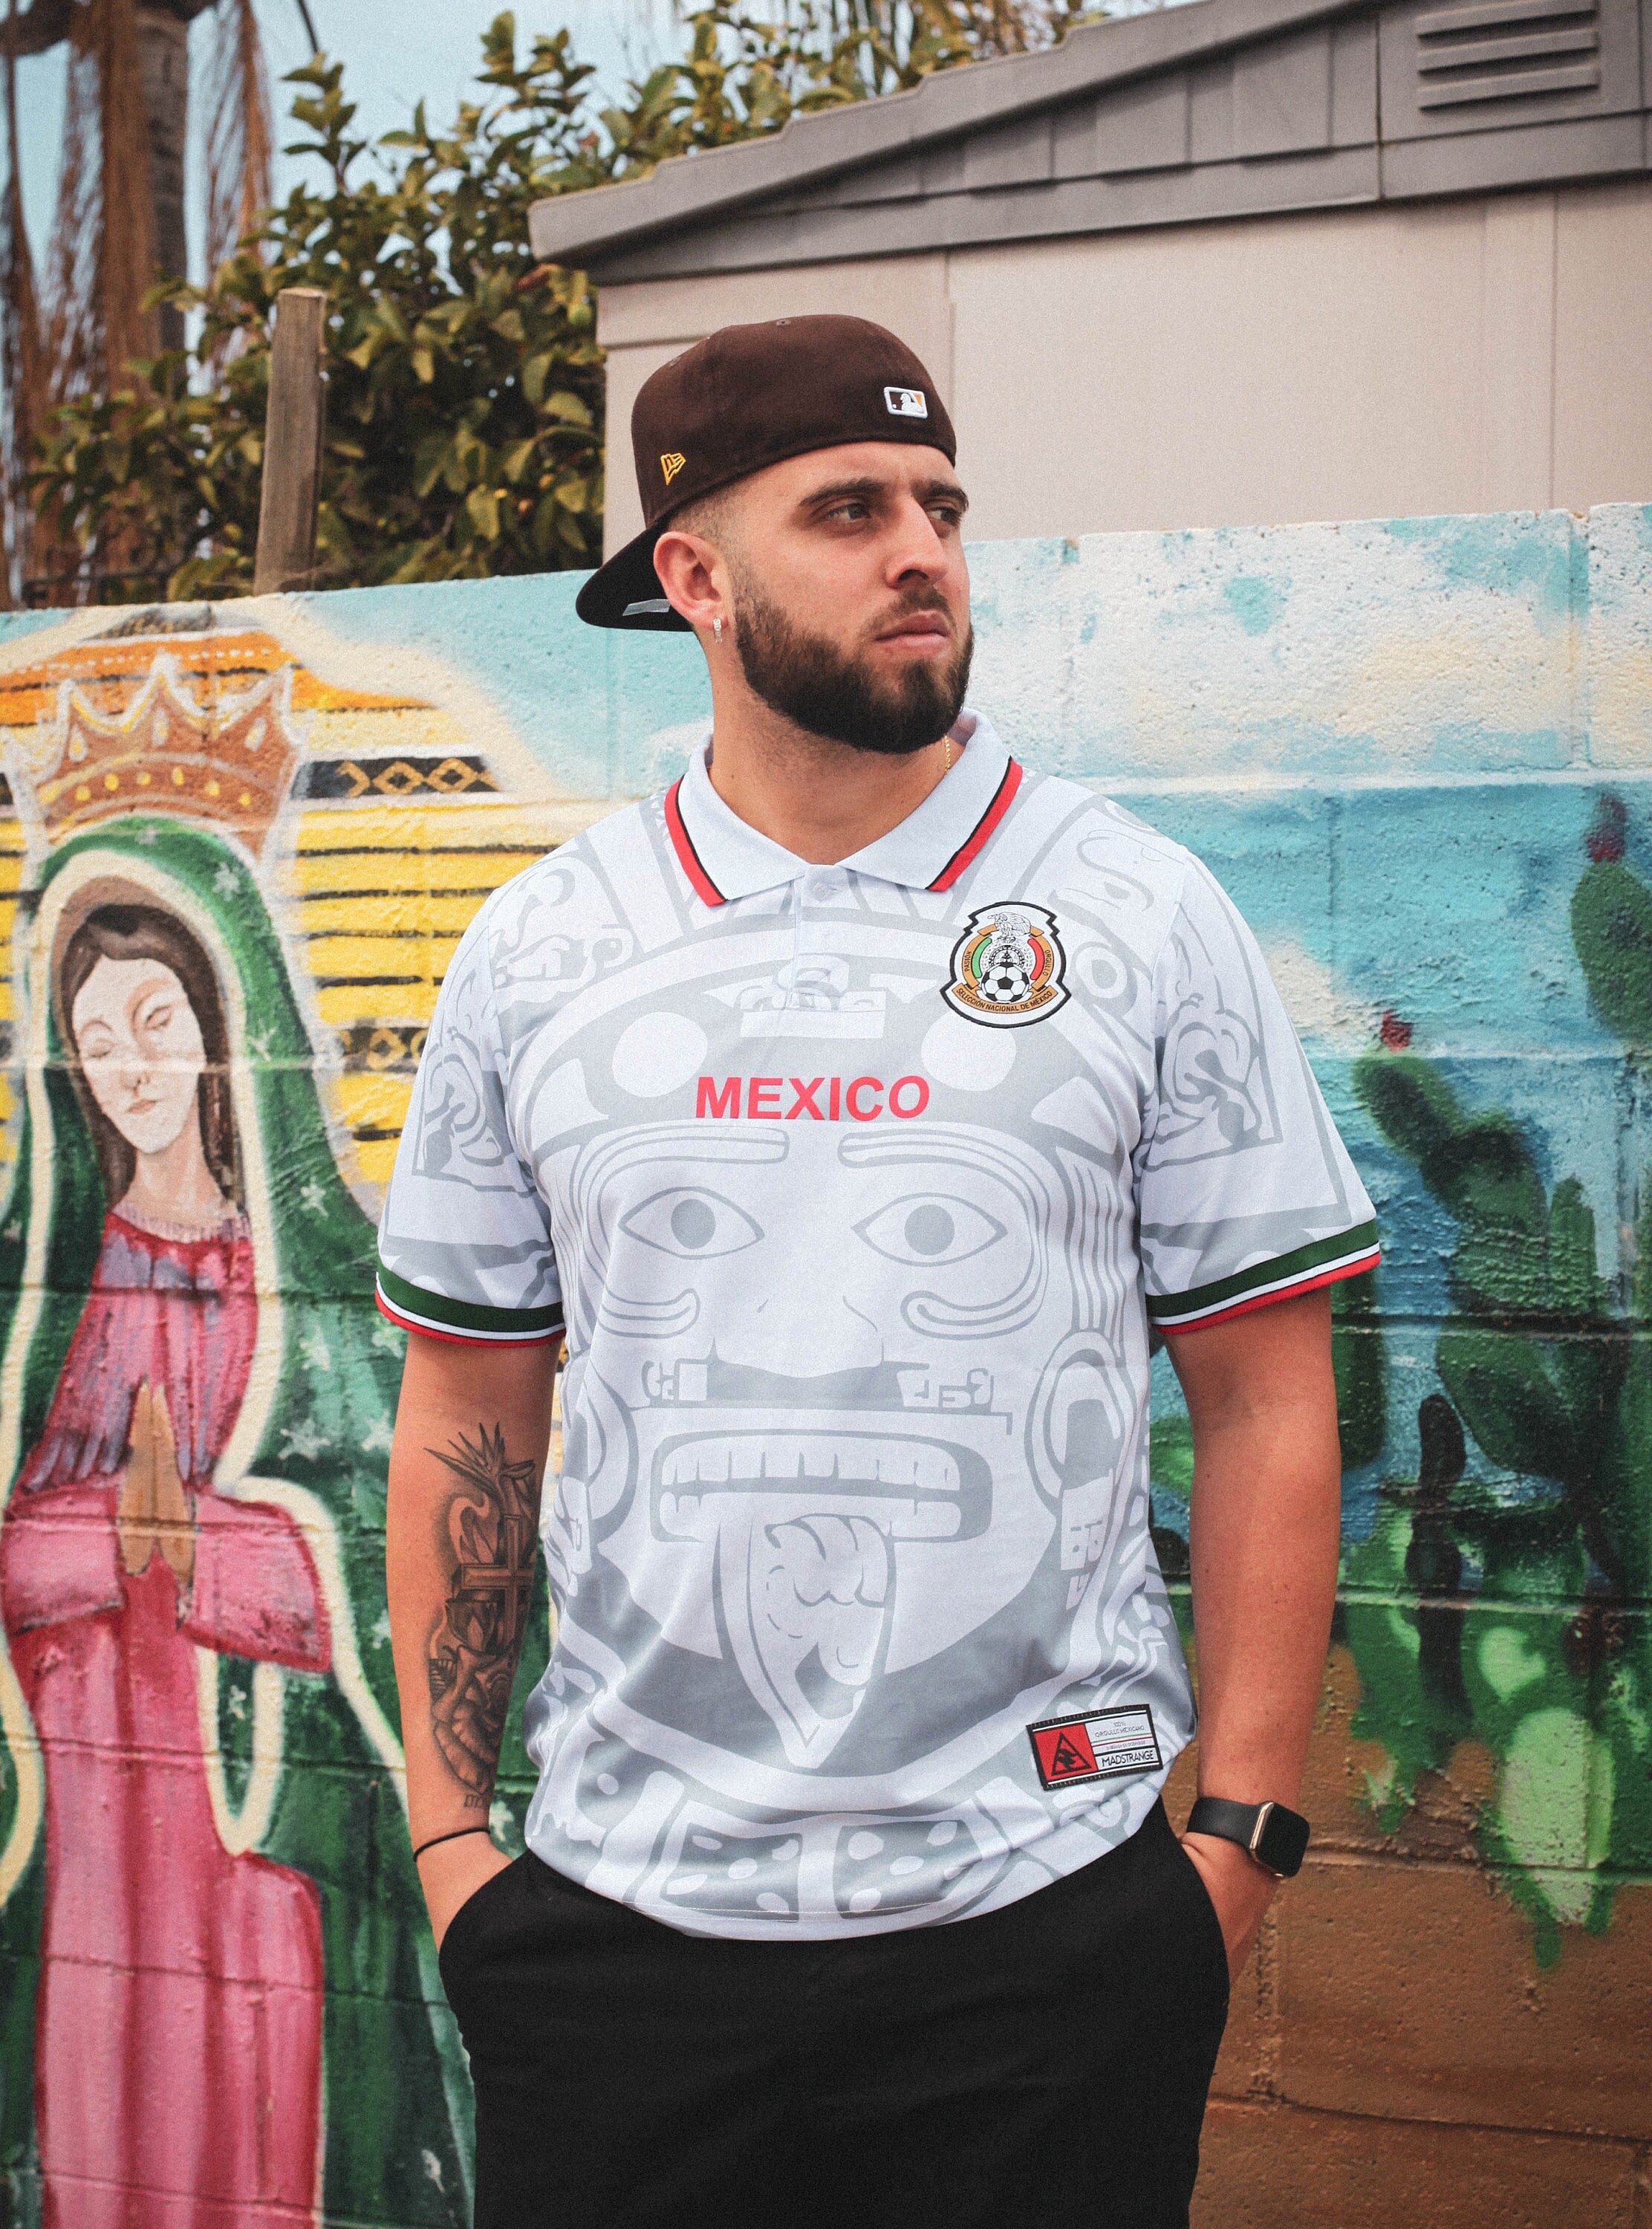 MEXICO 98/99 Away Jersey – Vintage Joint